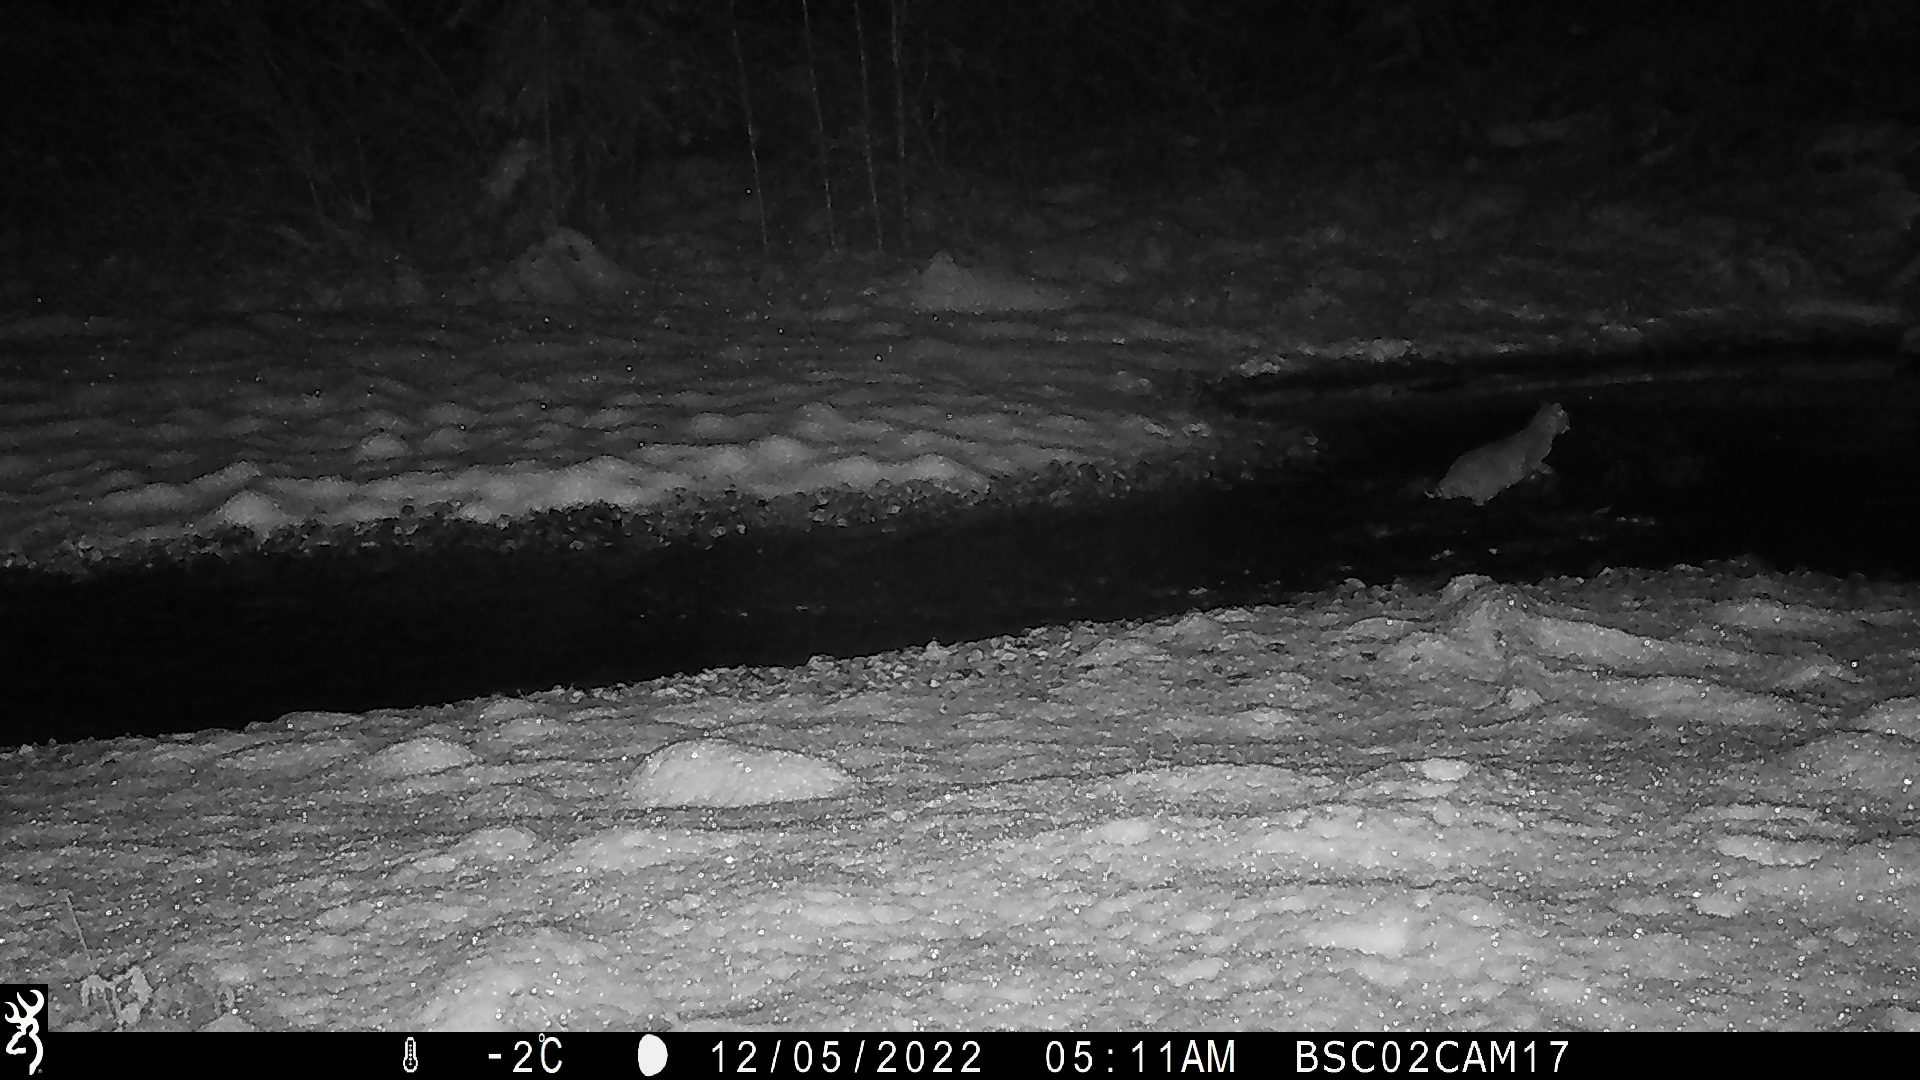 Bobcat trying to catch salmon in the river.